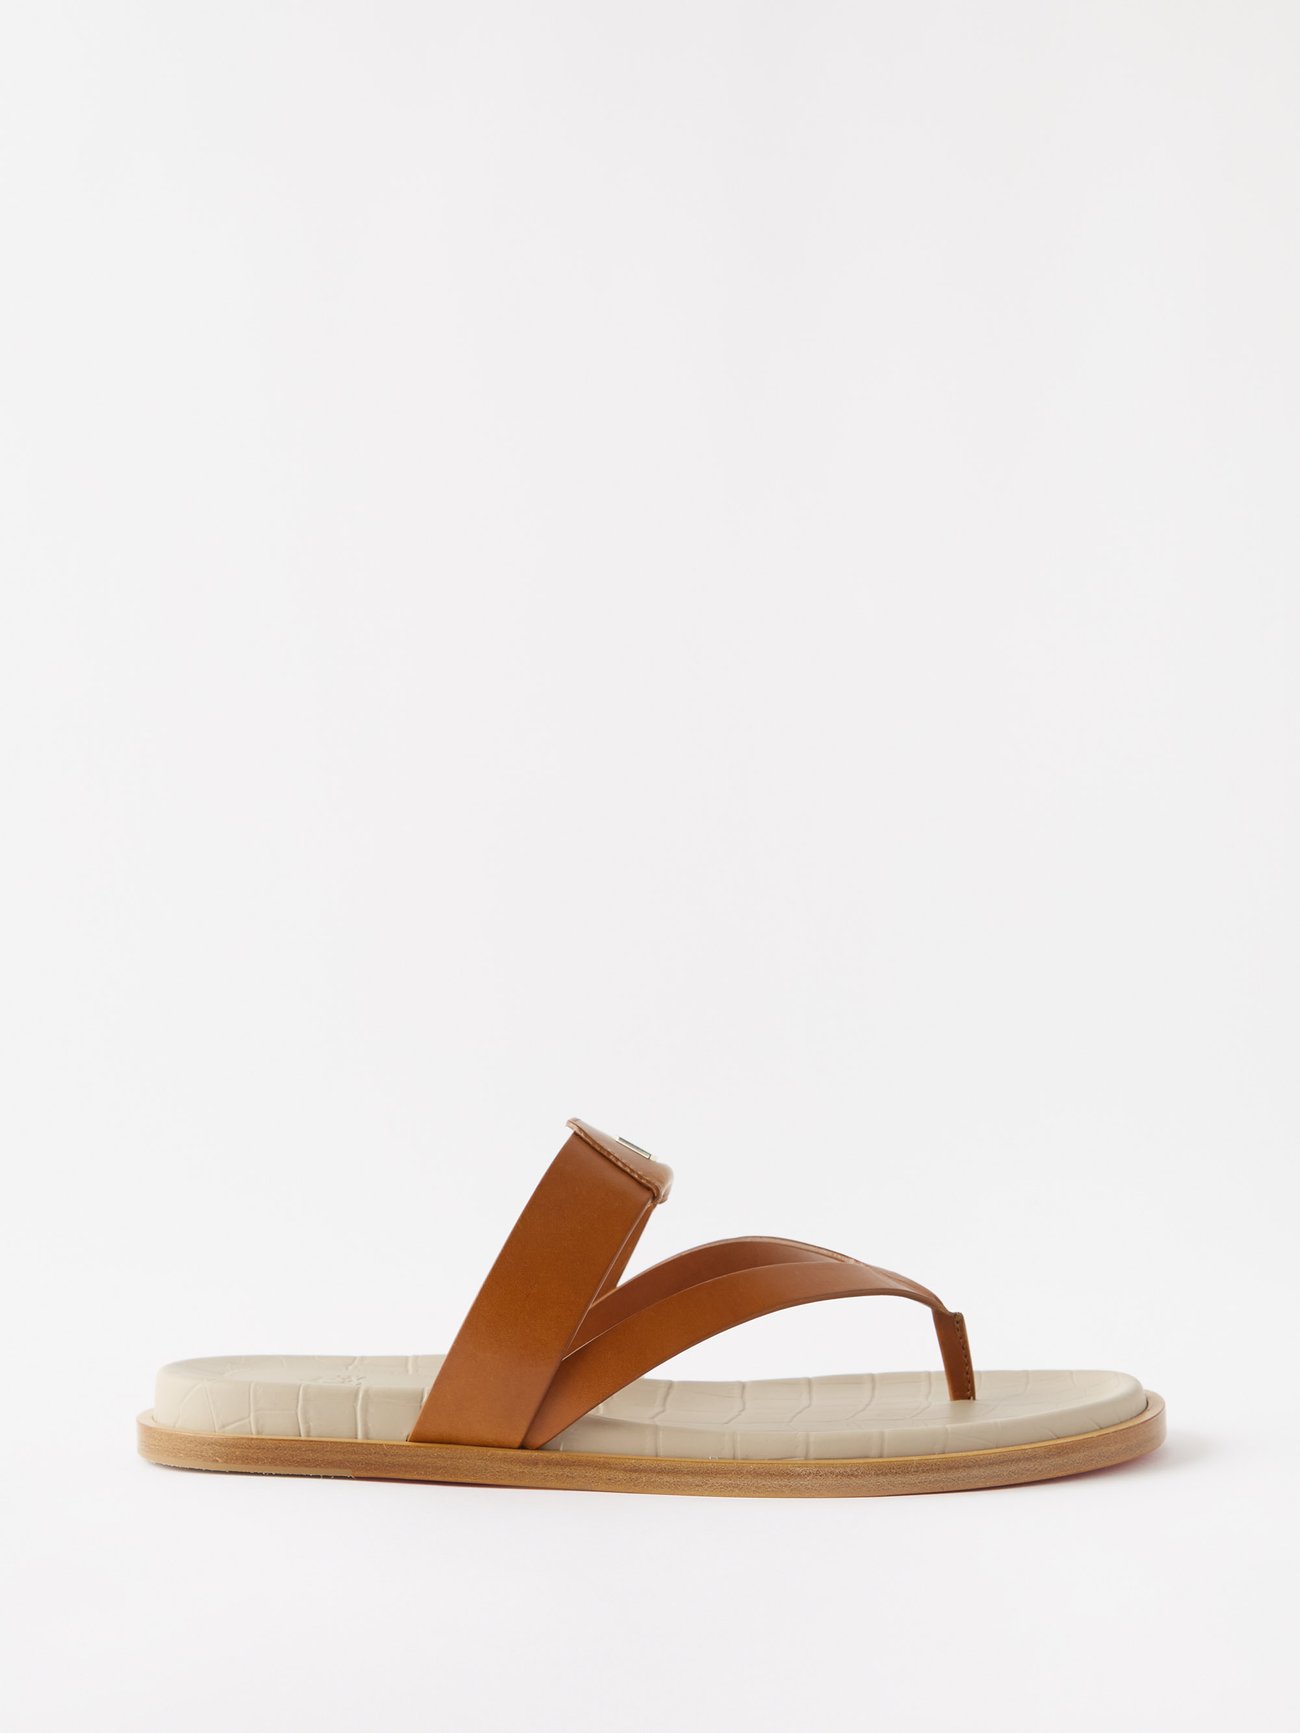 Tan Paolito leather sandals | Christian Louboutin | MATCHES UK